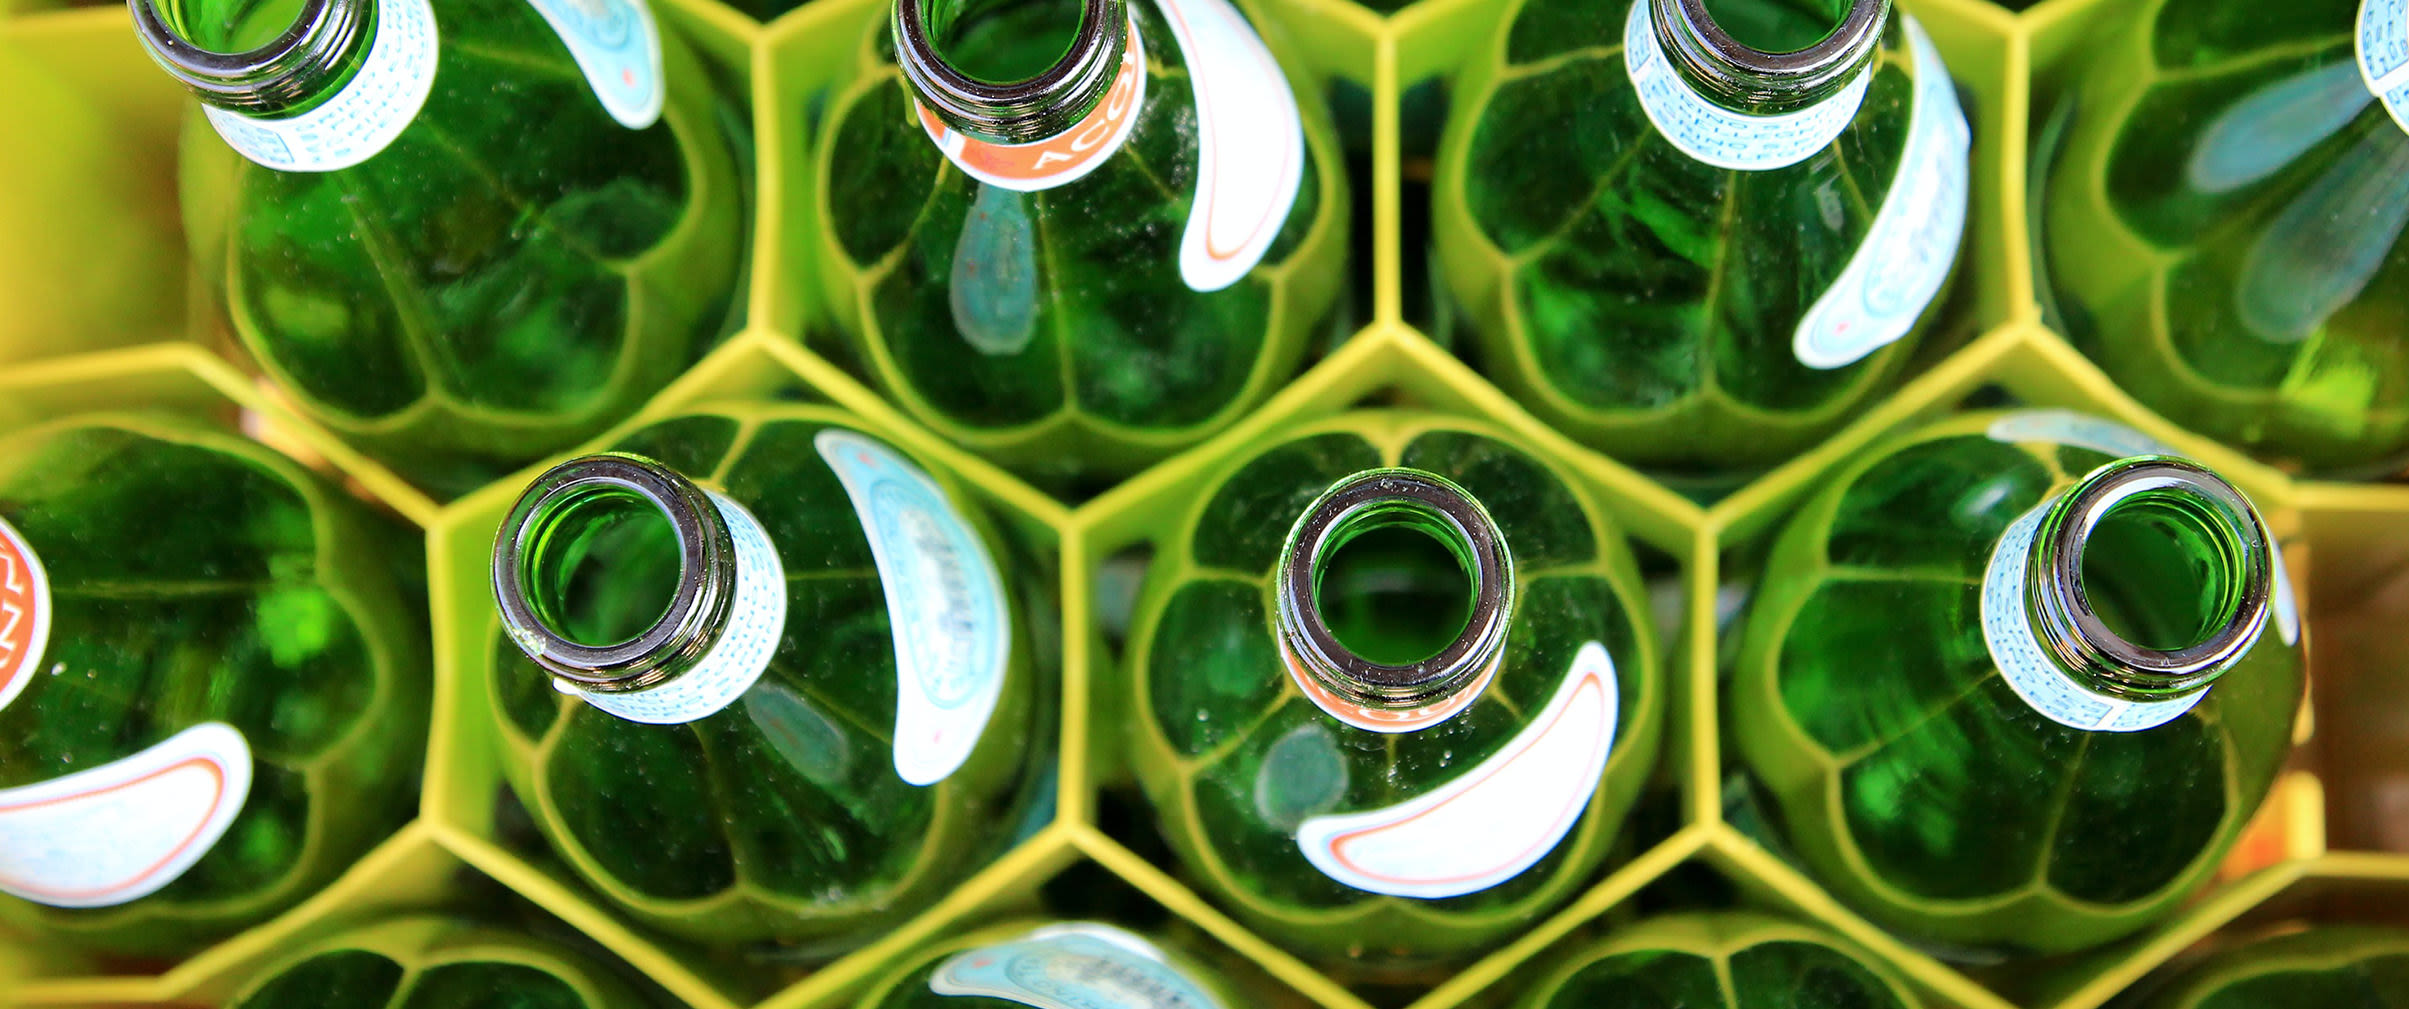 Bottles without caps viewed from above